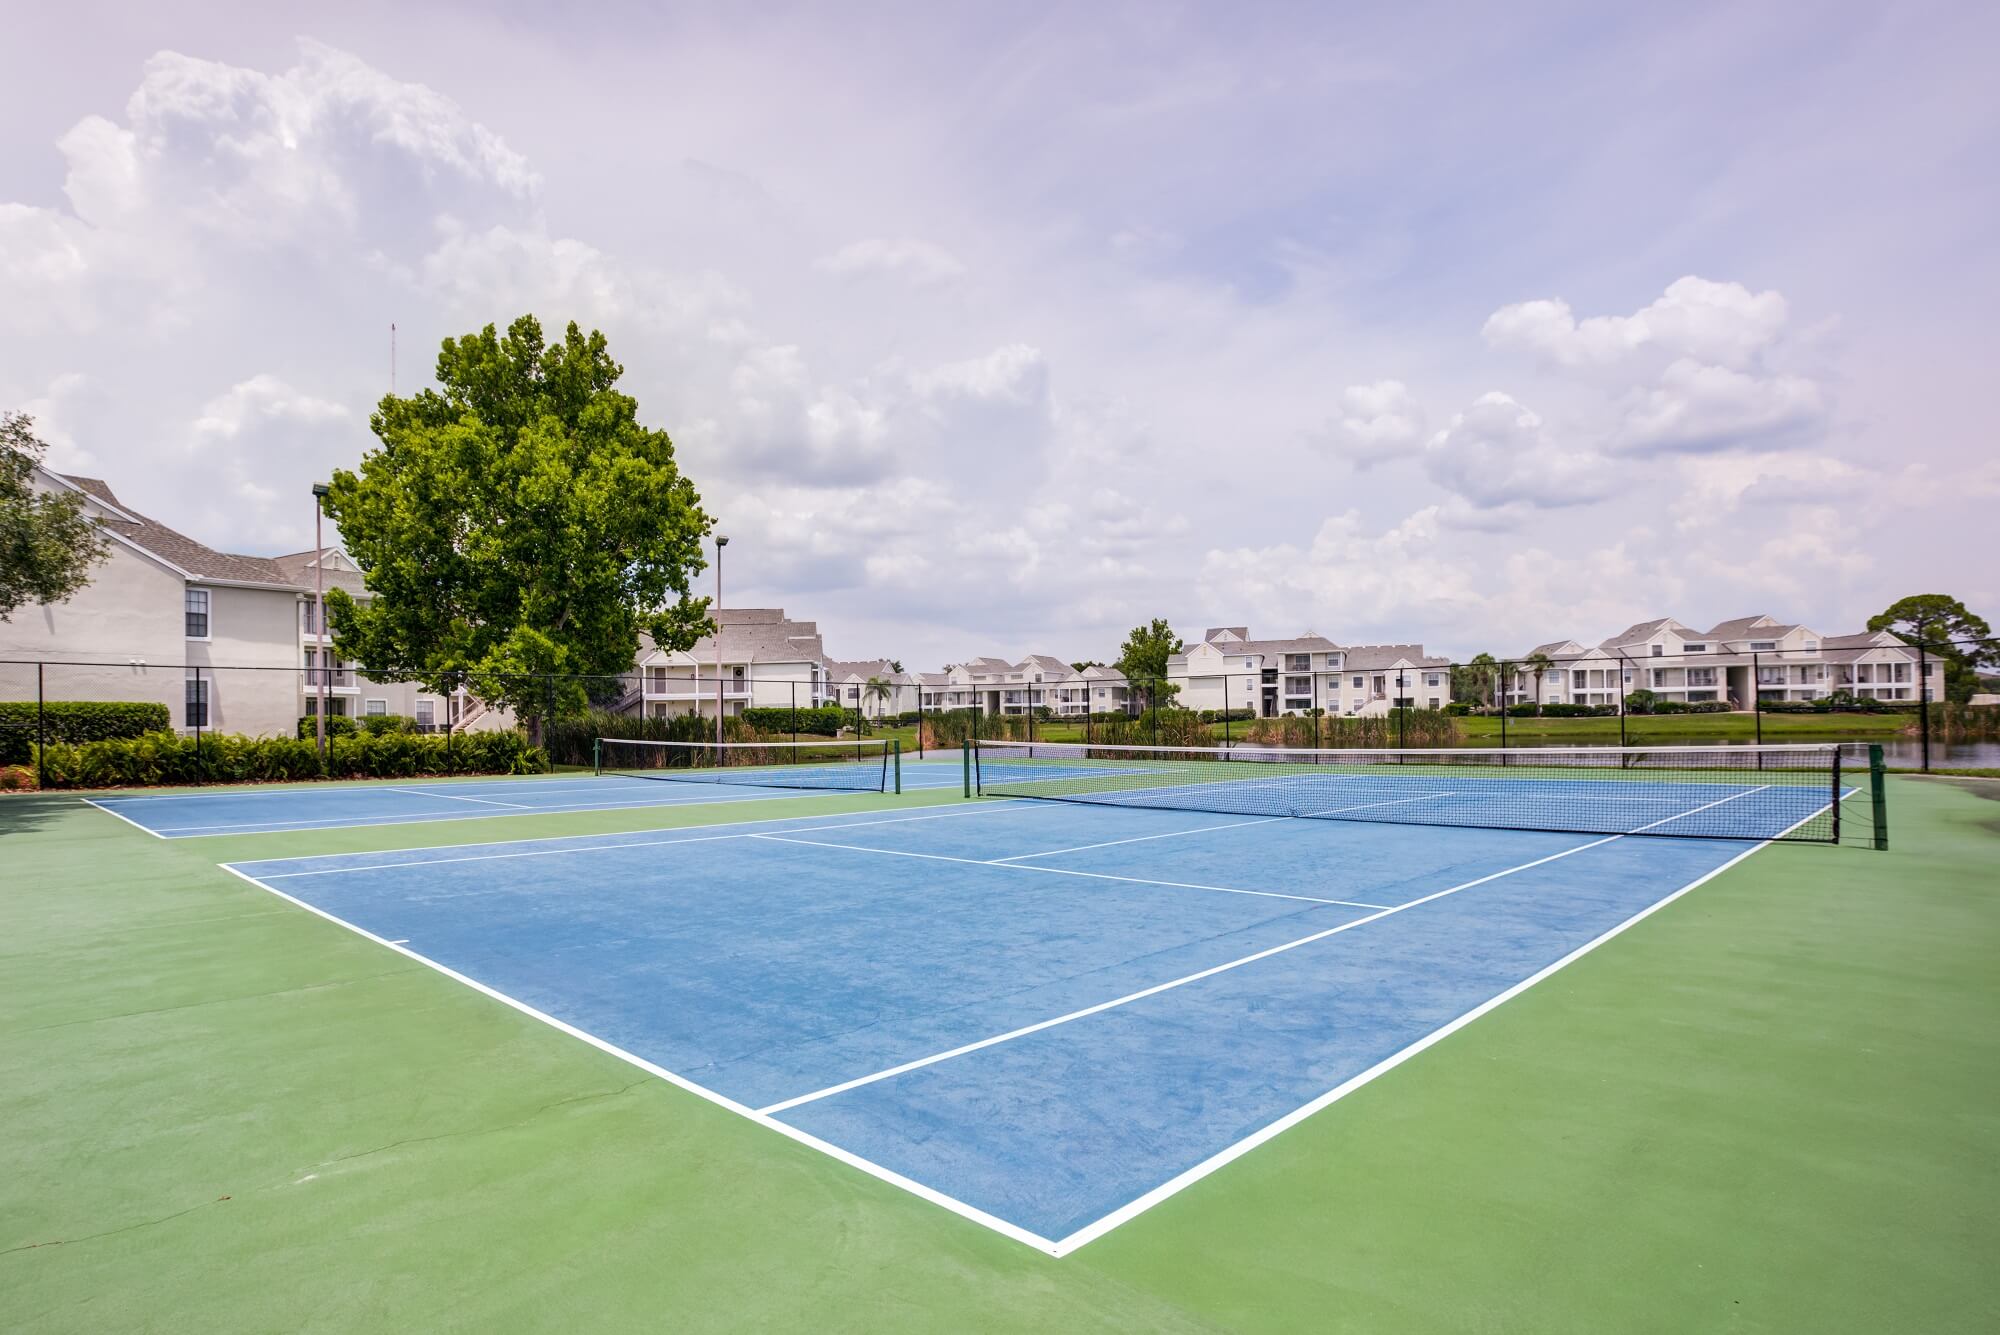 double tennis courts.